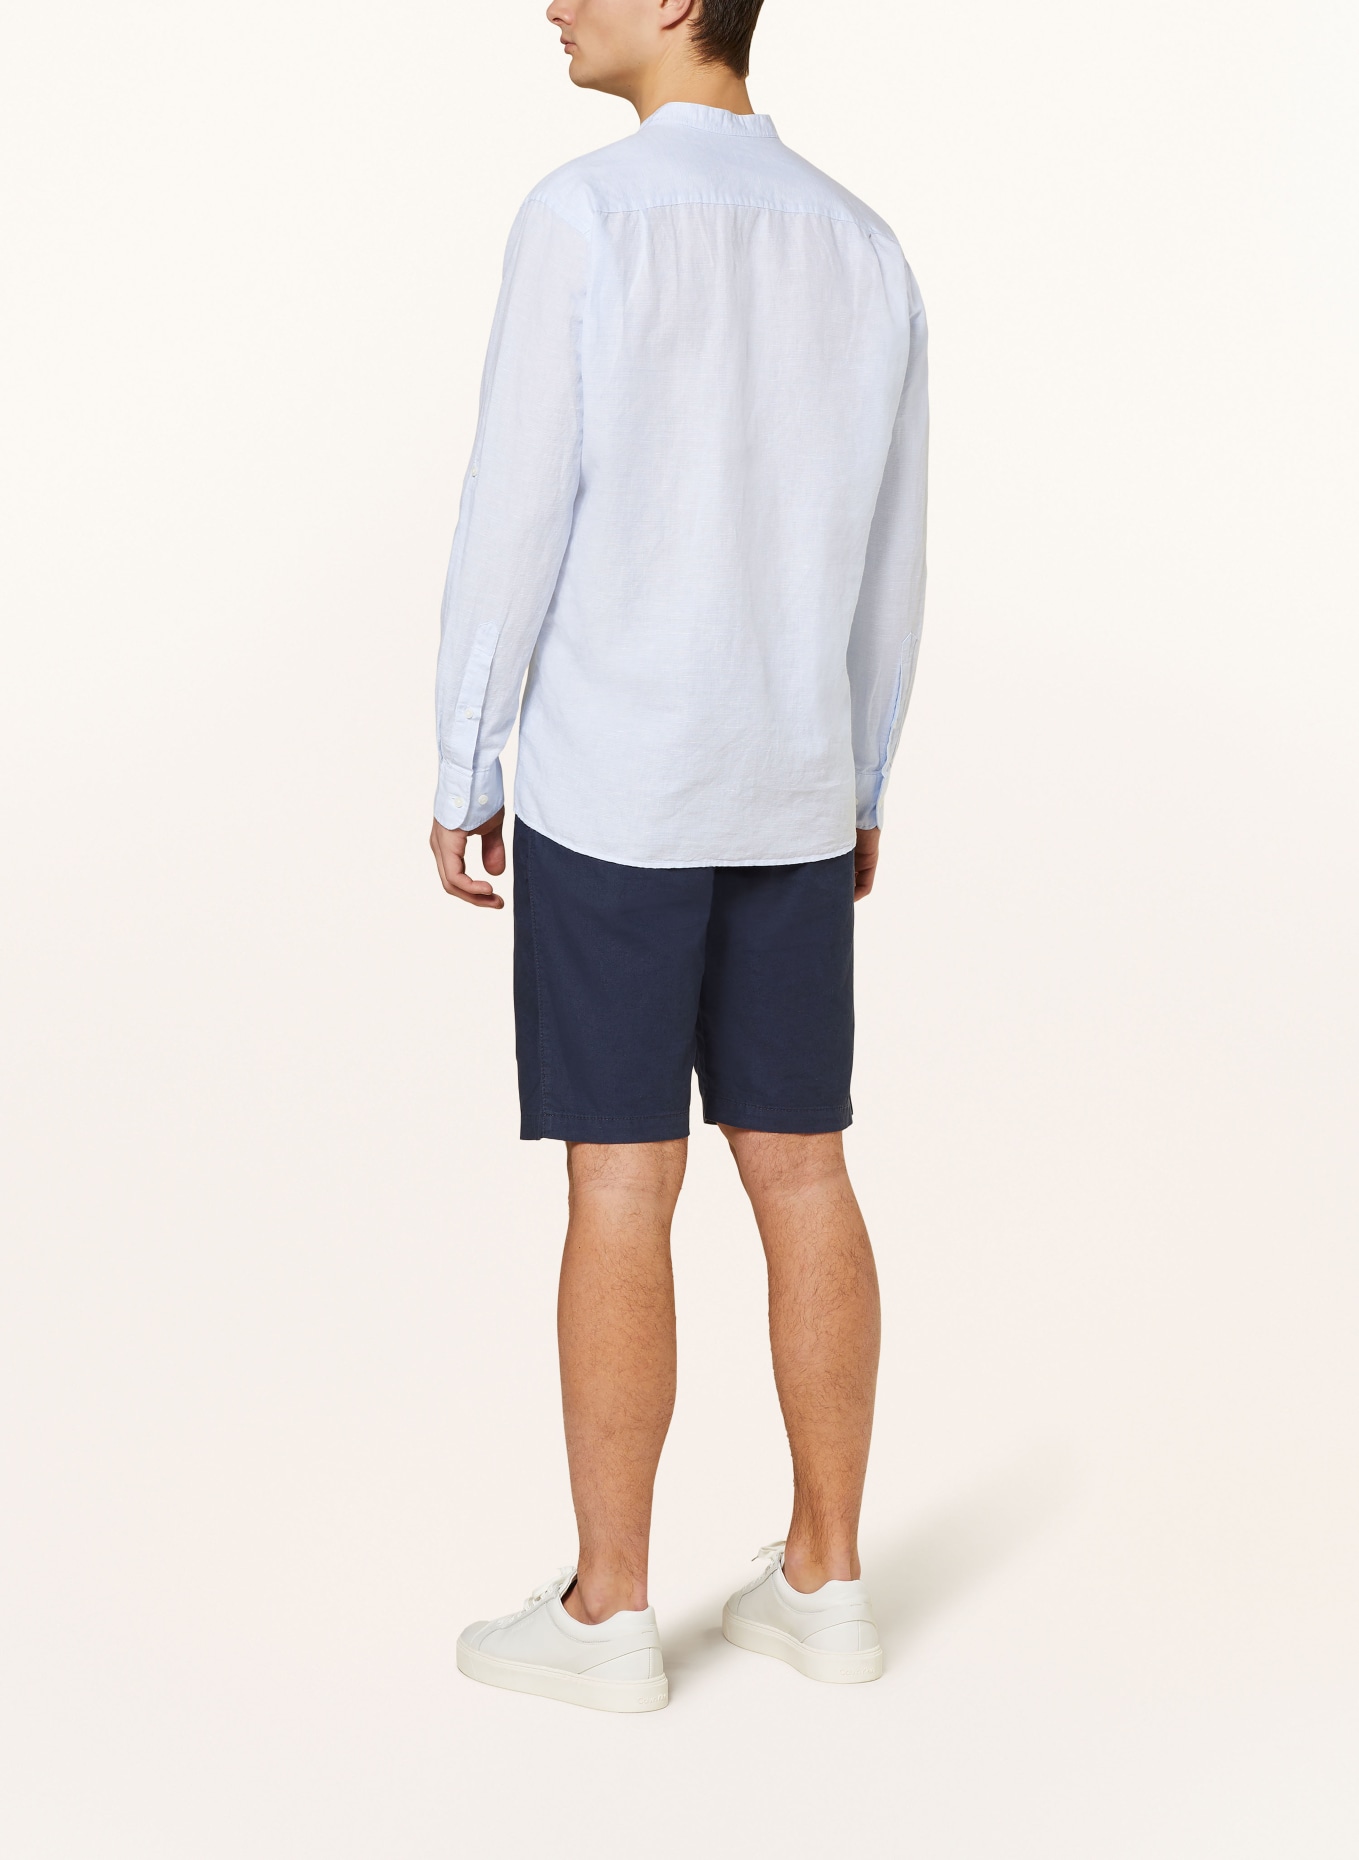 STROKESMAN'S Shirt regular fit with stand-up collar and linen, Color: LIGHT BLUE (Image 3)